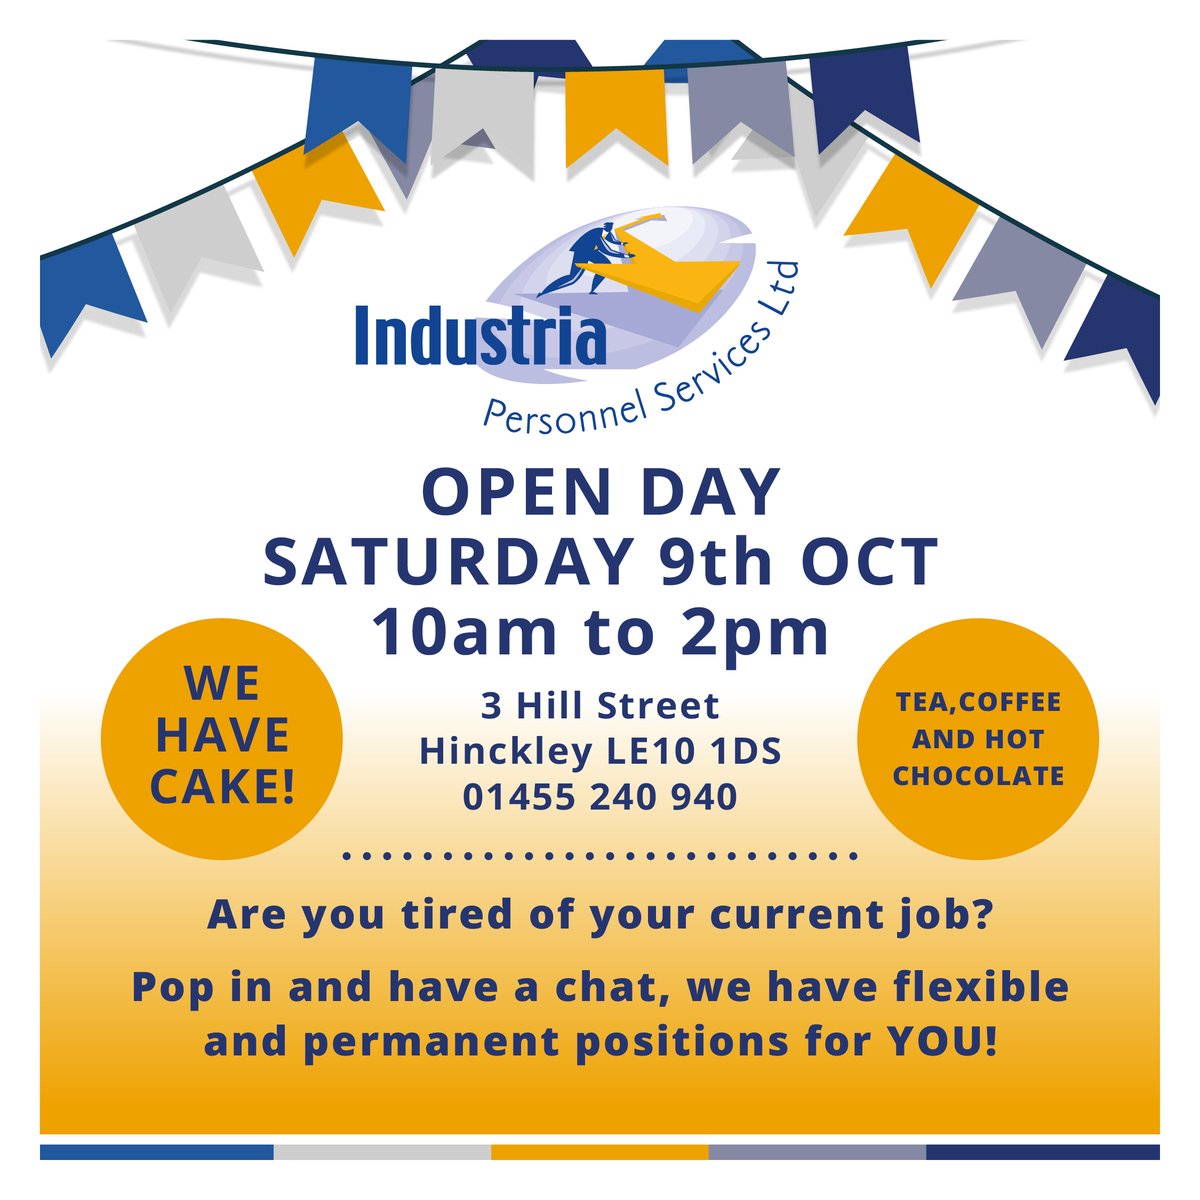 You are Invited! We have an open day and you are invited! Come to our open event and speak to our team of experts on how they can help you get into job! It will be chats, coffee and cake! . . . . #industria #industriapersonnel #newchallenge #newjob #jobless #newcareer